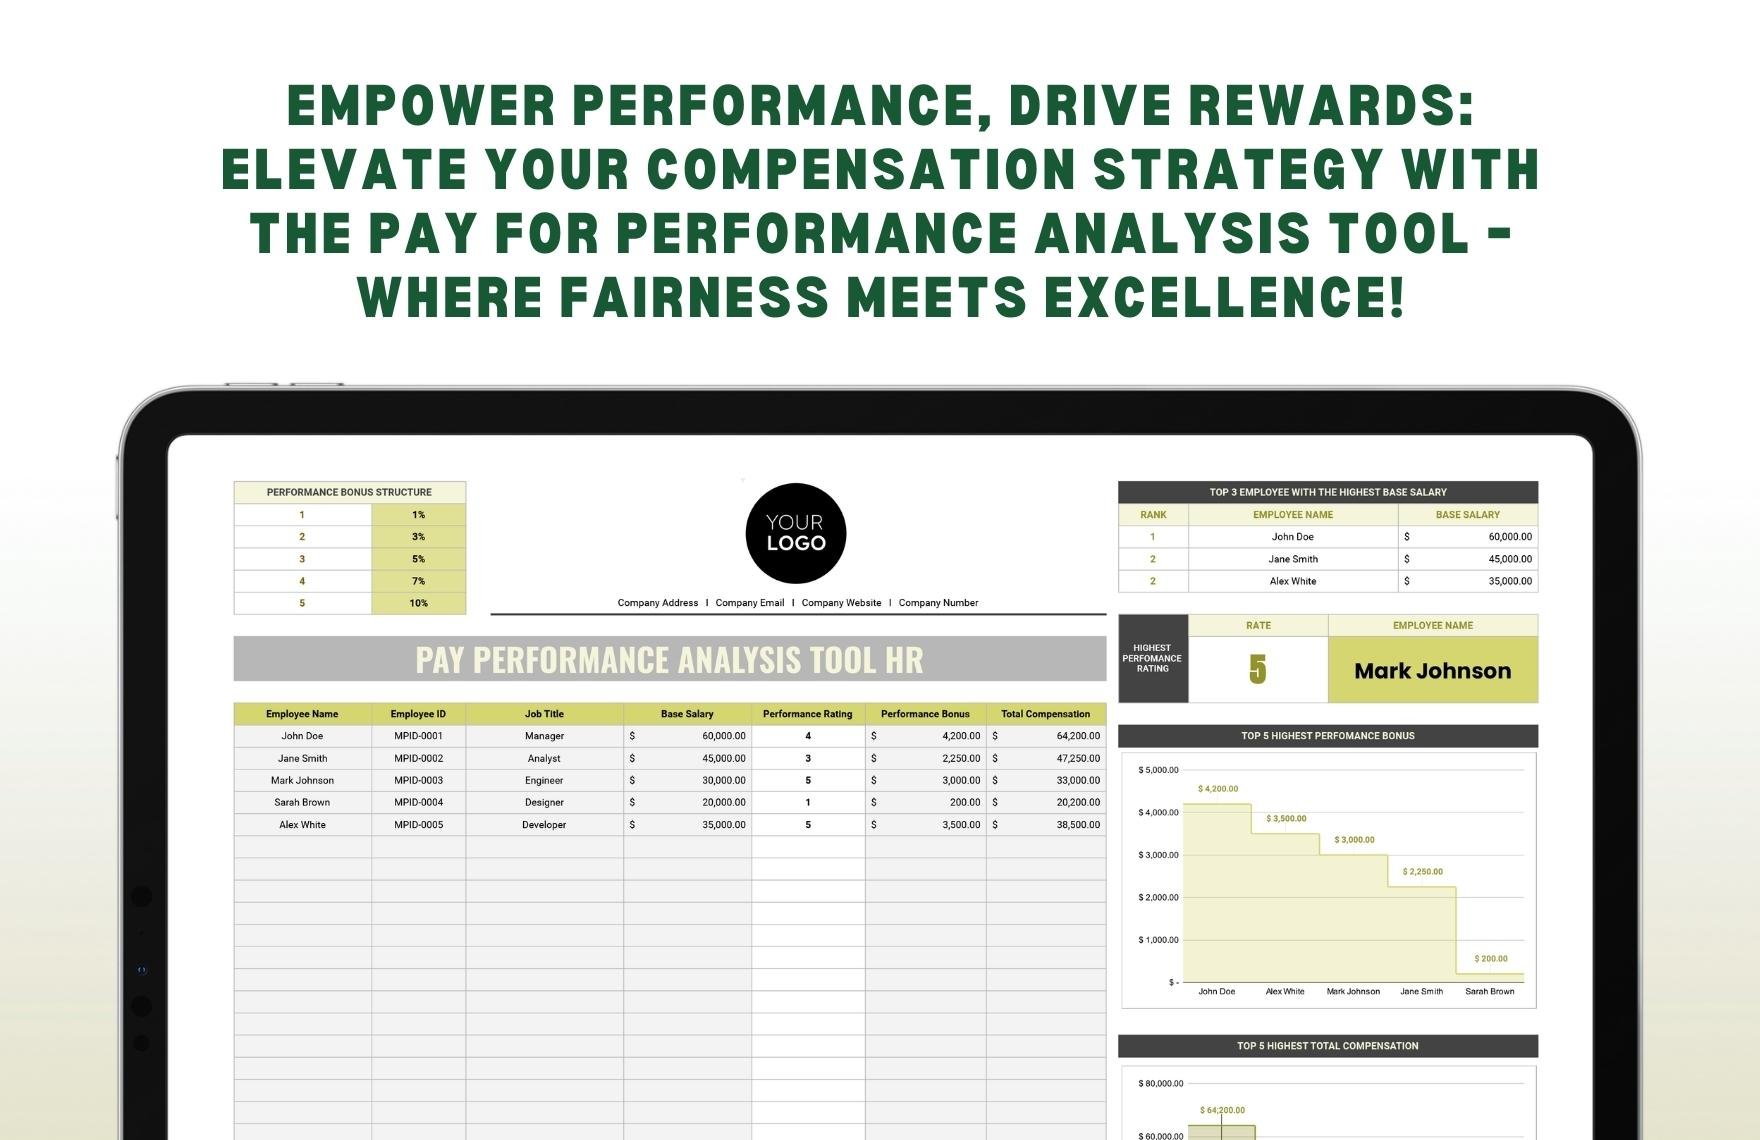 Pay for Performance Analysis Tool HR Template